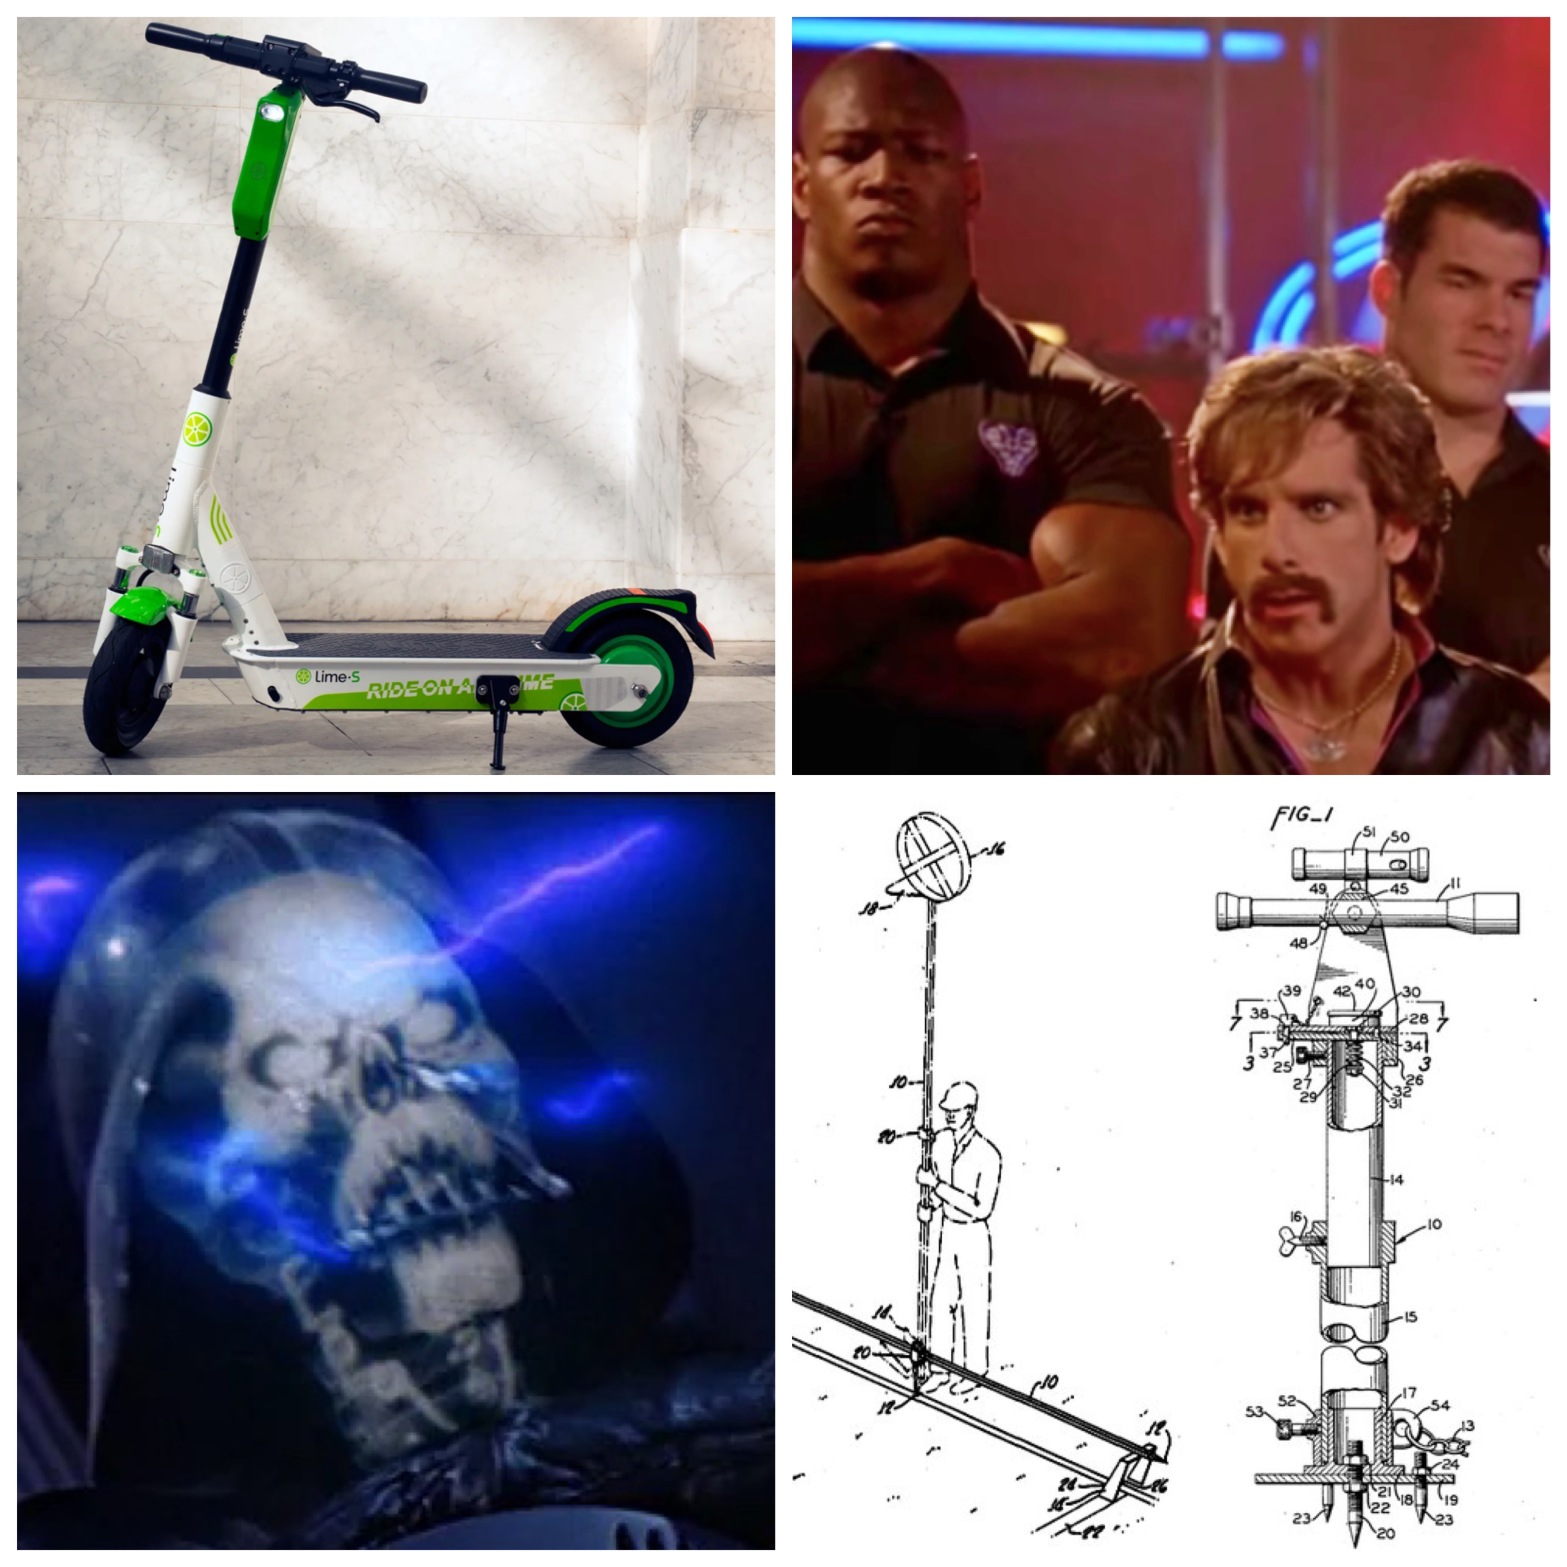 A Lime scooter. Globo Gym's team from Dodgeball. Darth Vader getting hit by Force lightning. The patent application for a Dicker Rod.